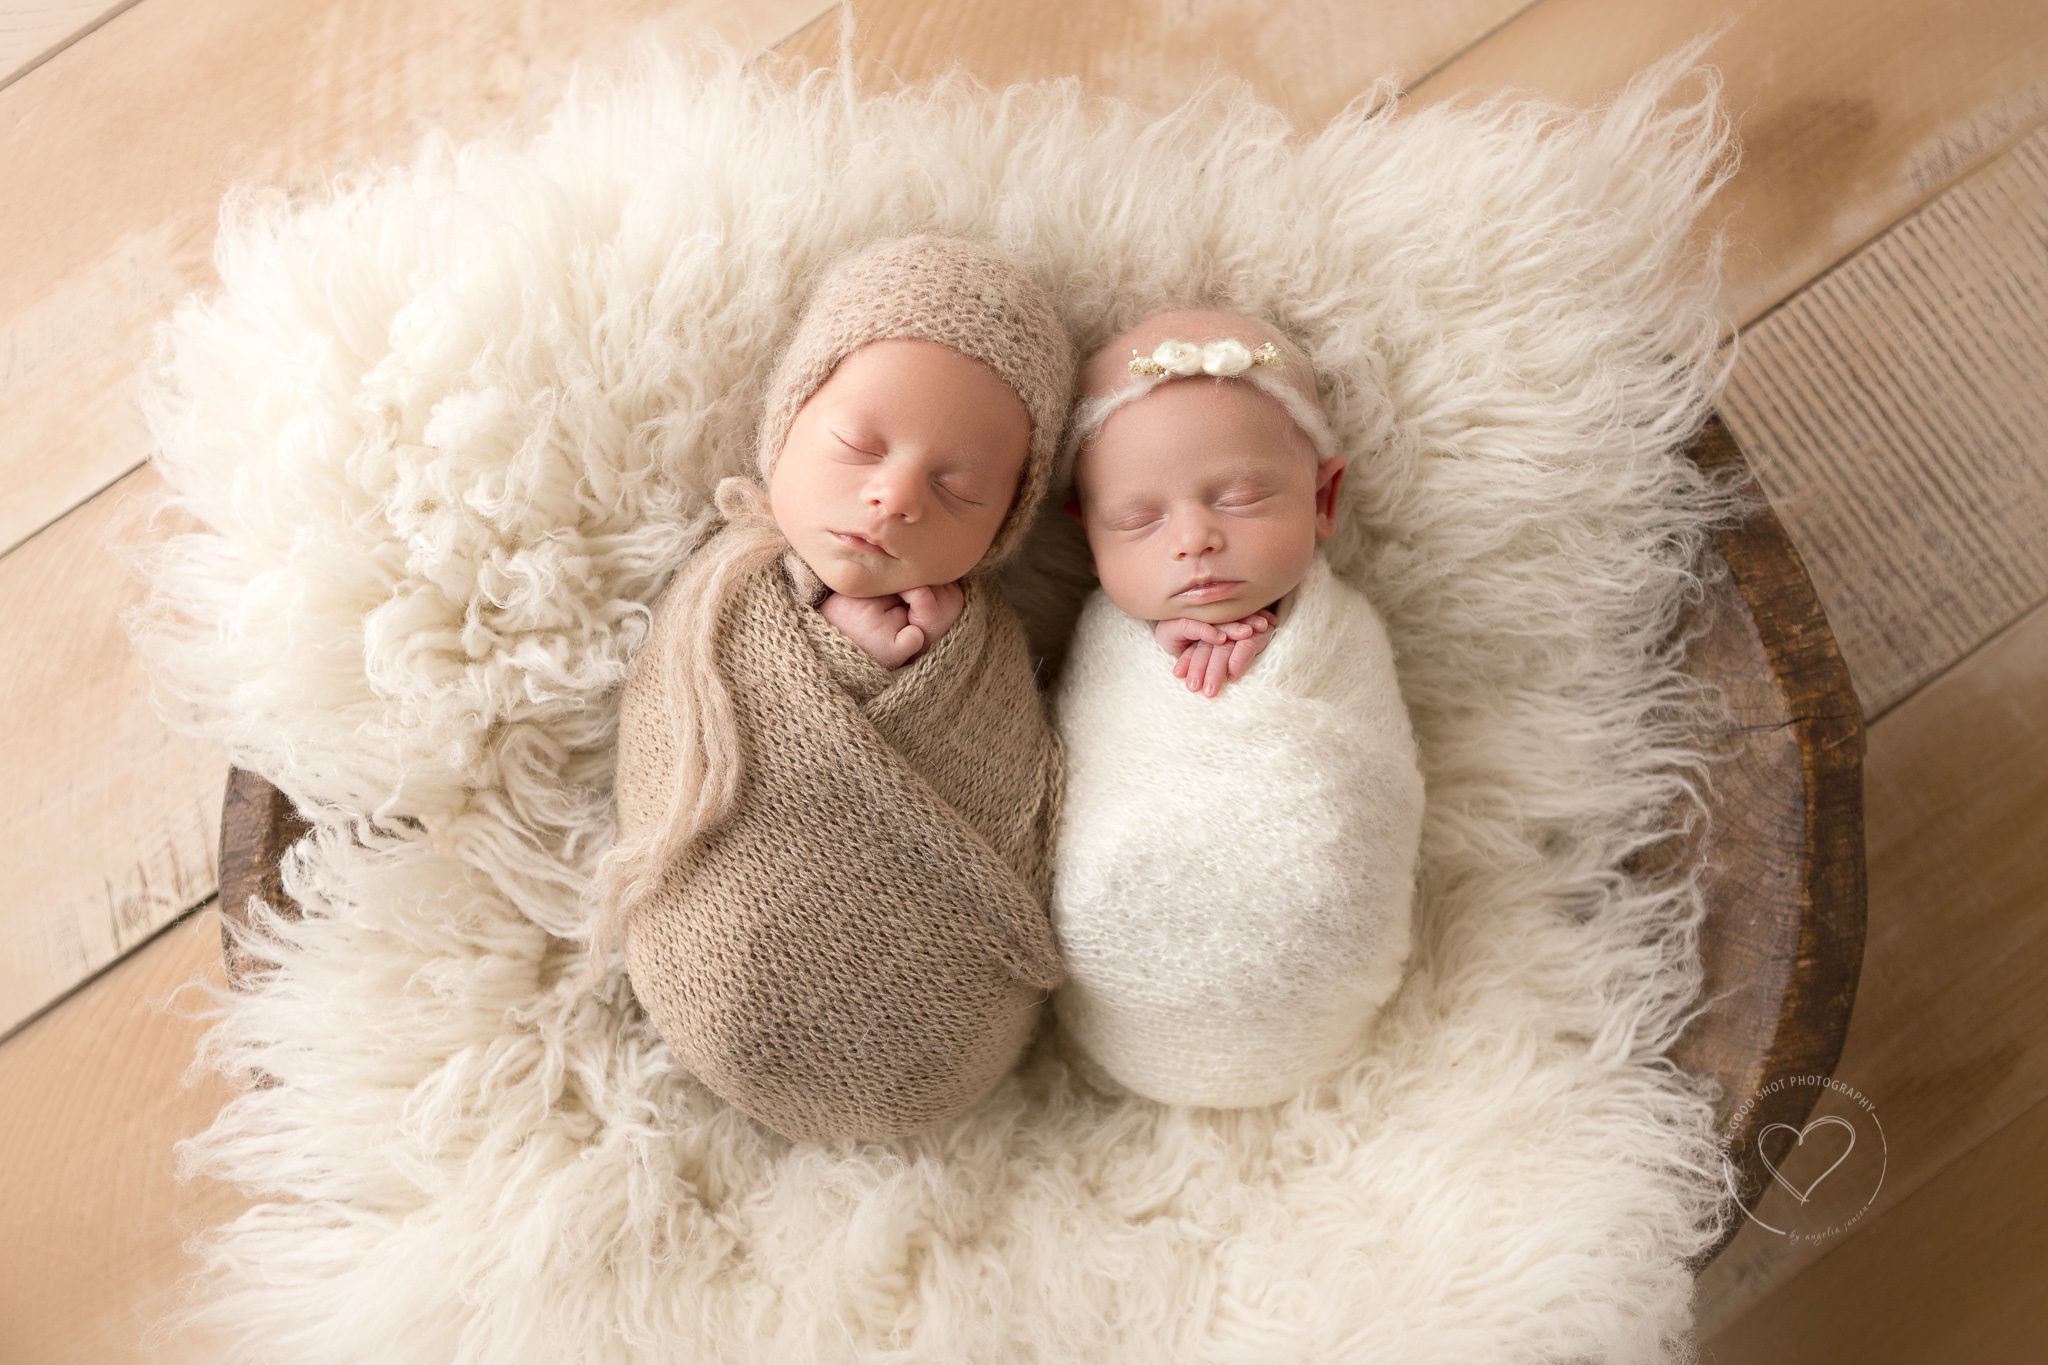 Newborn baby photographer, fresno, clovis, newborn twins, boy and girl, wrapped side by side, laying in bowl